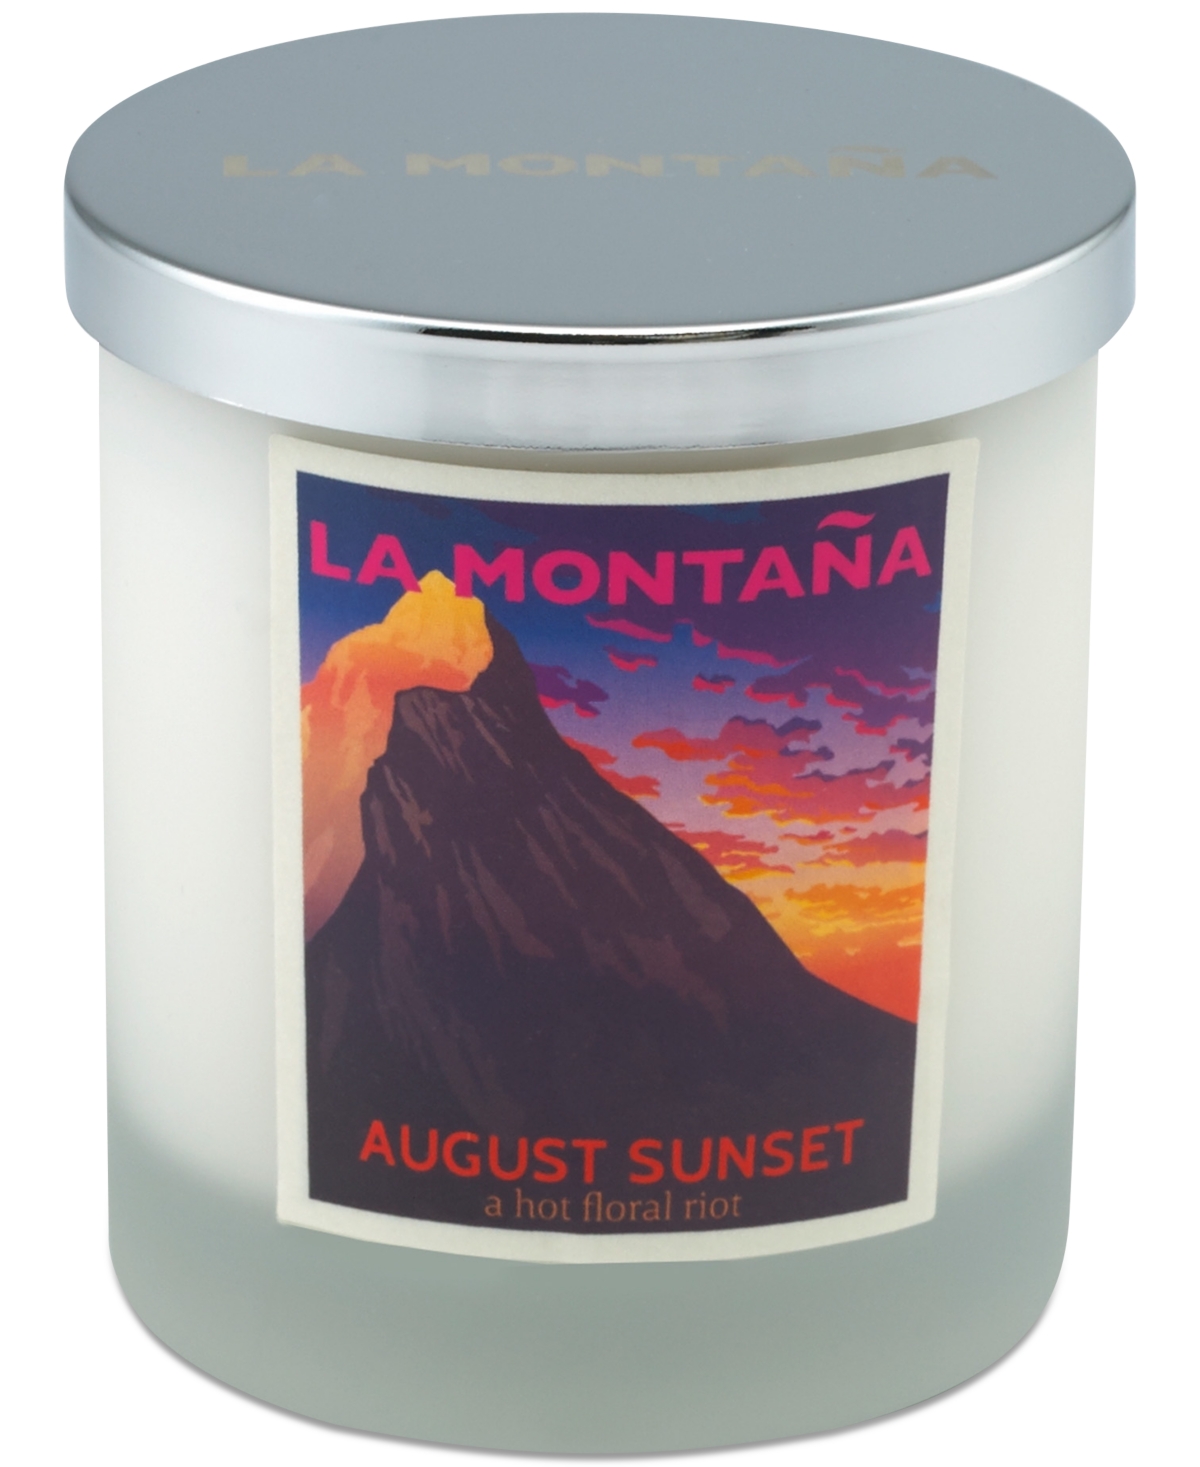 La Montana August Sunset Scented Candle, 8 oz.